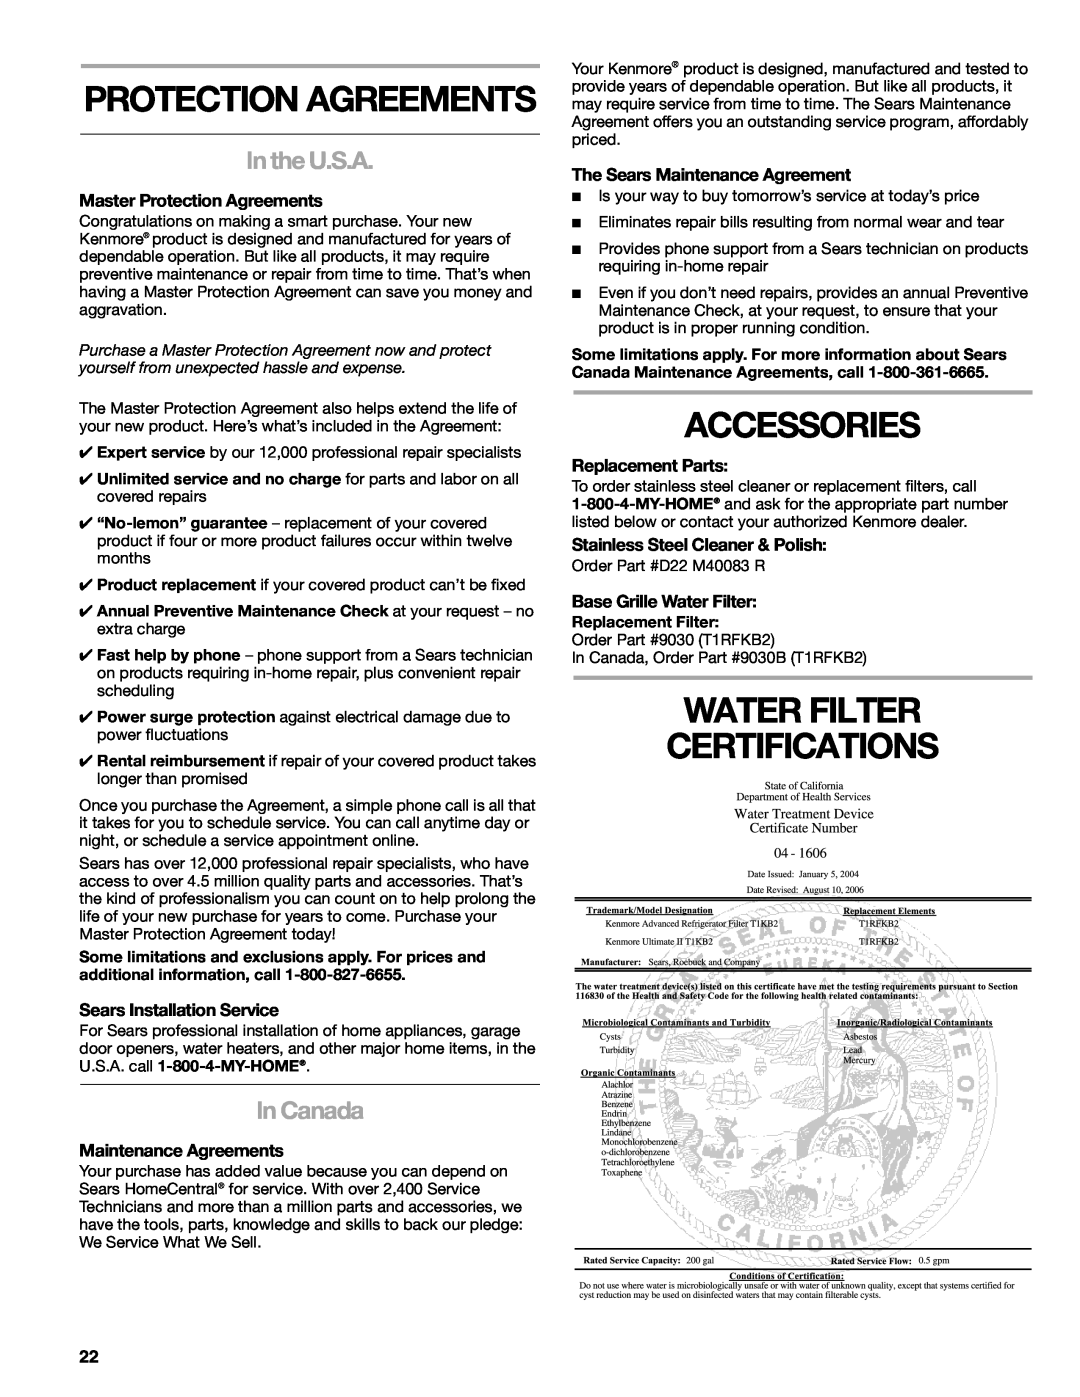 Sears T1KB2/T1RFKB2 manual Accessories, Water Filter Certifications, Protection Agreements, In the U.S.A, In Canada 